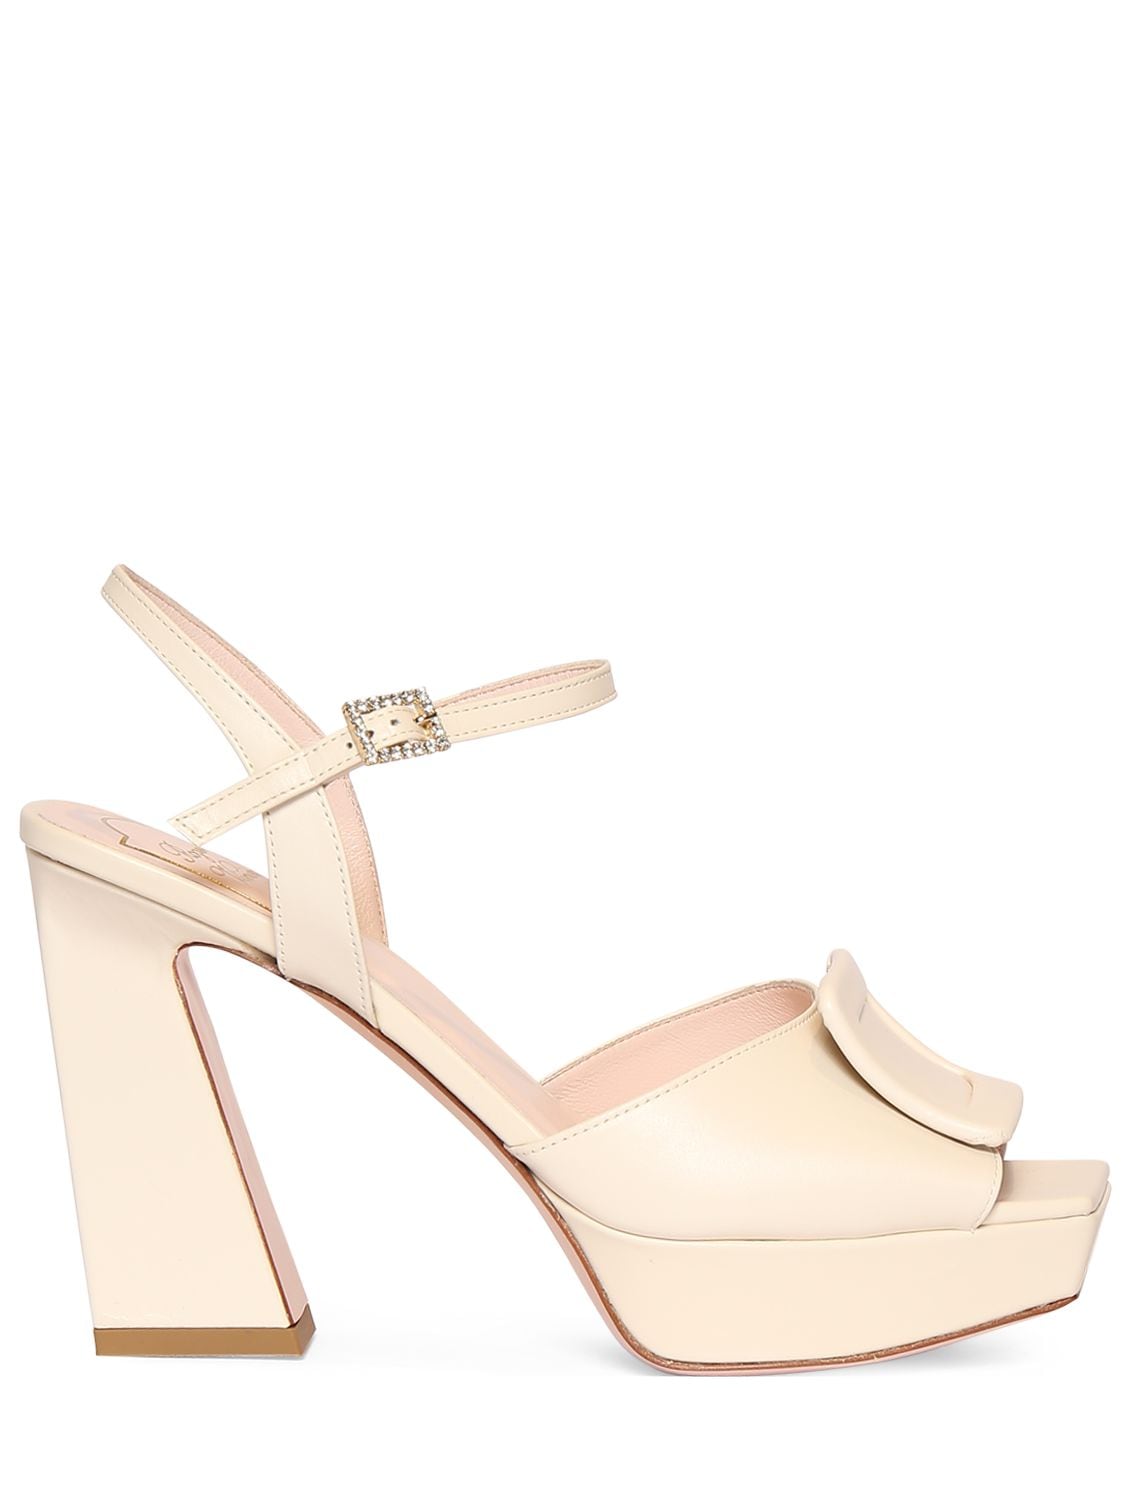 Roger Vivier 100mm Wedge Leather Sandals In Off White